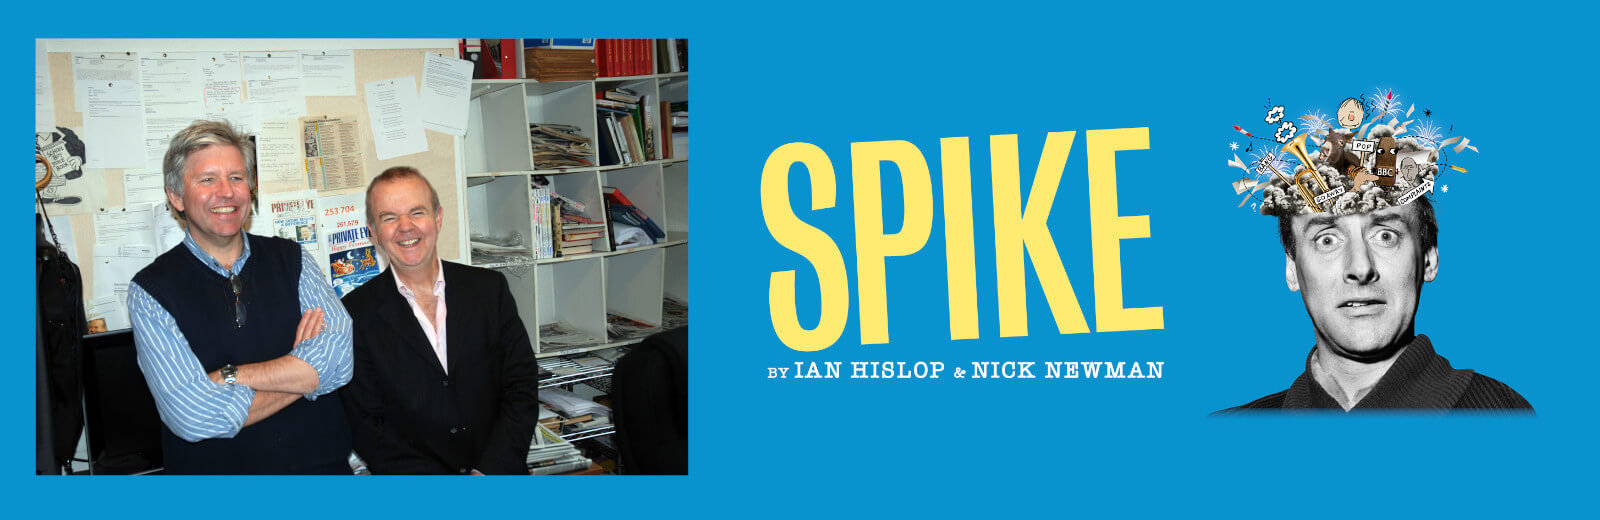 Q & A with the authors of Spike - A new play coming to Darlington Hippodrome